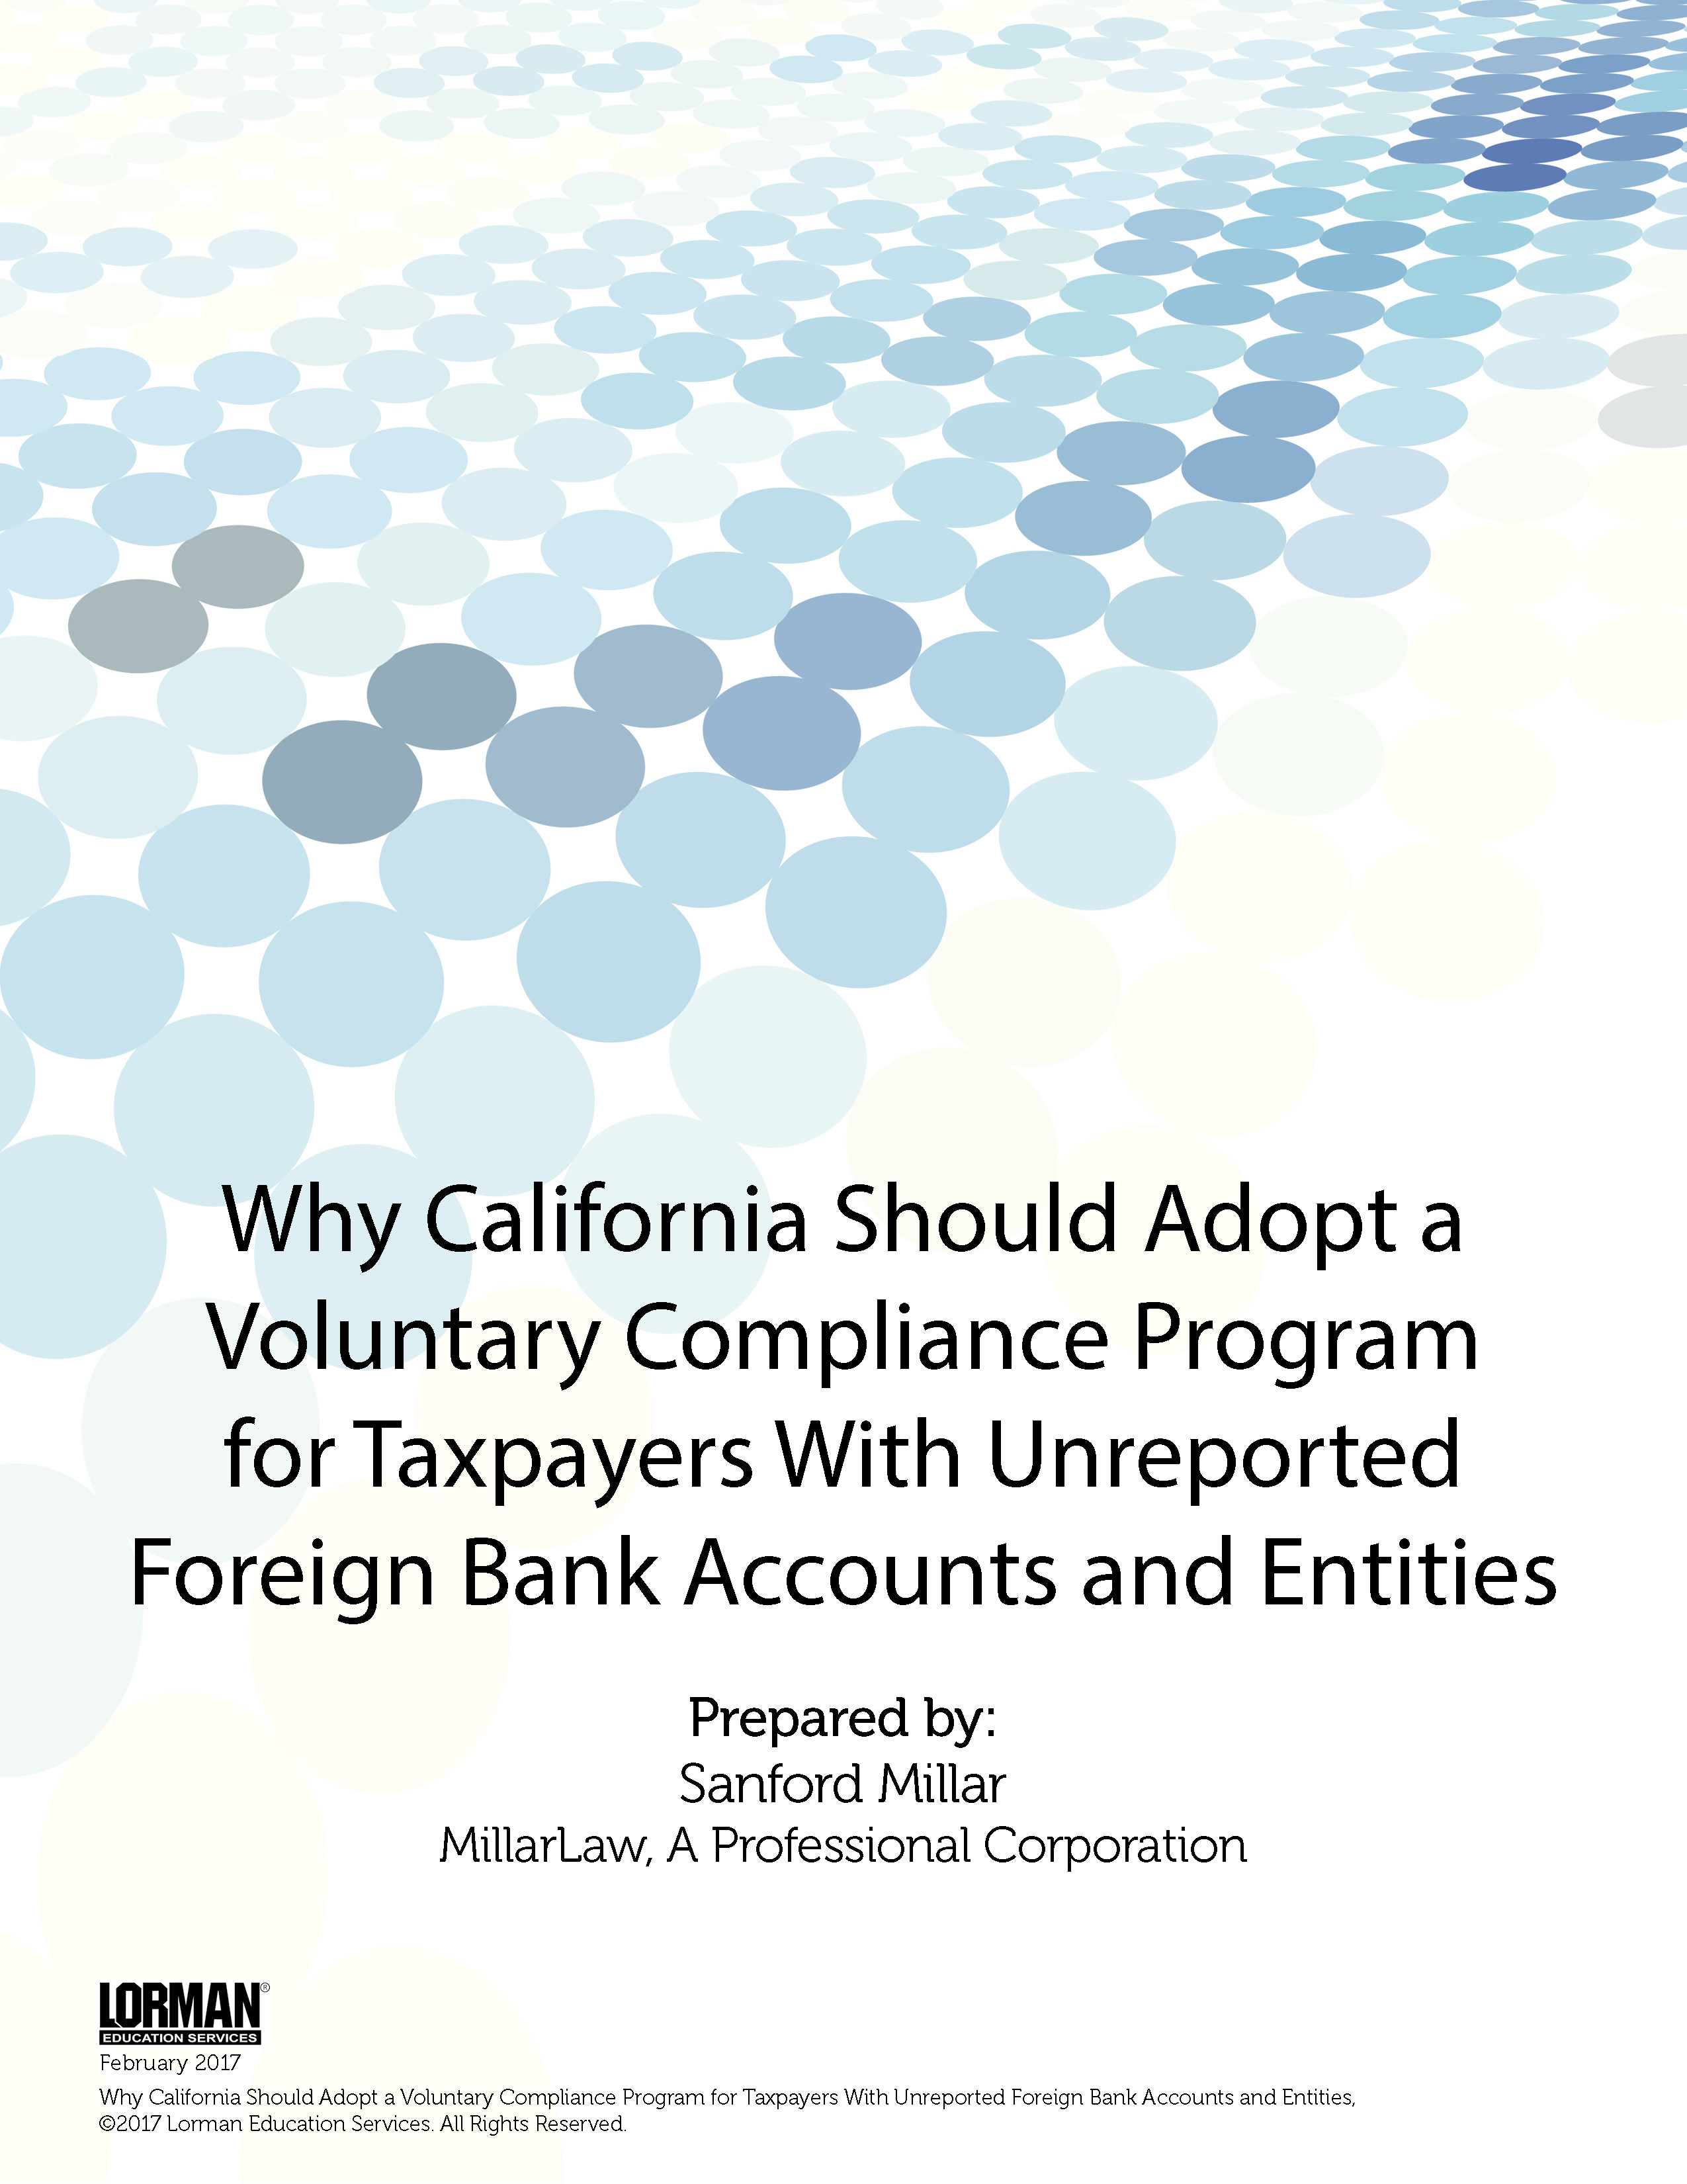 Why California Should Adopt a Voluntary Compliance Program